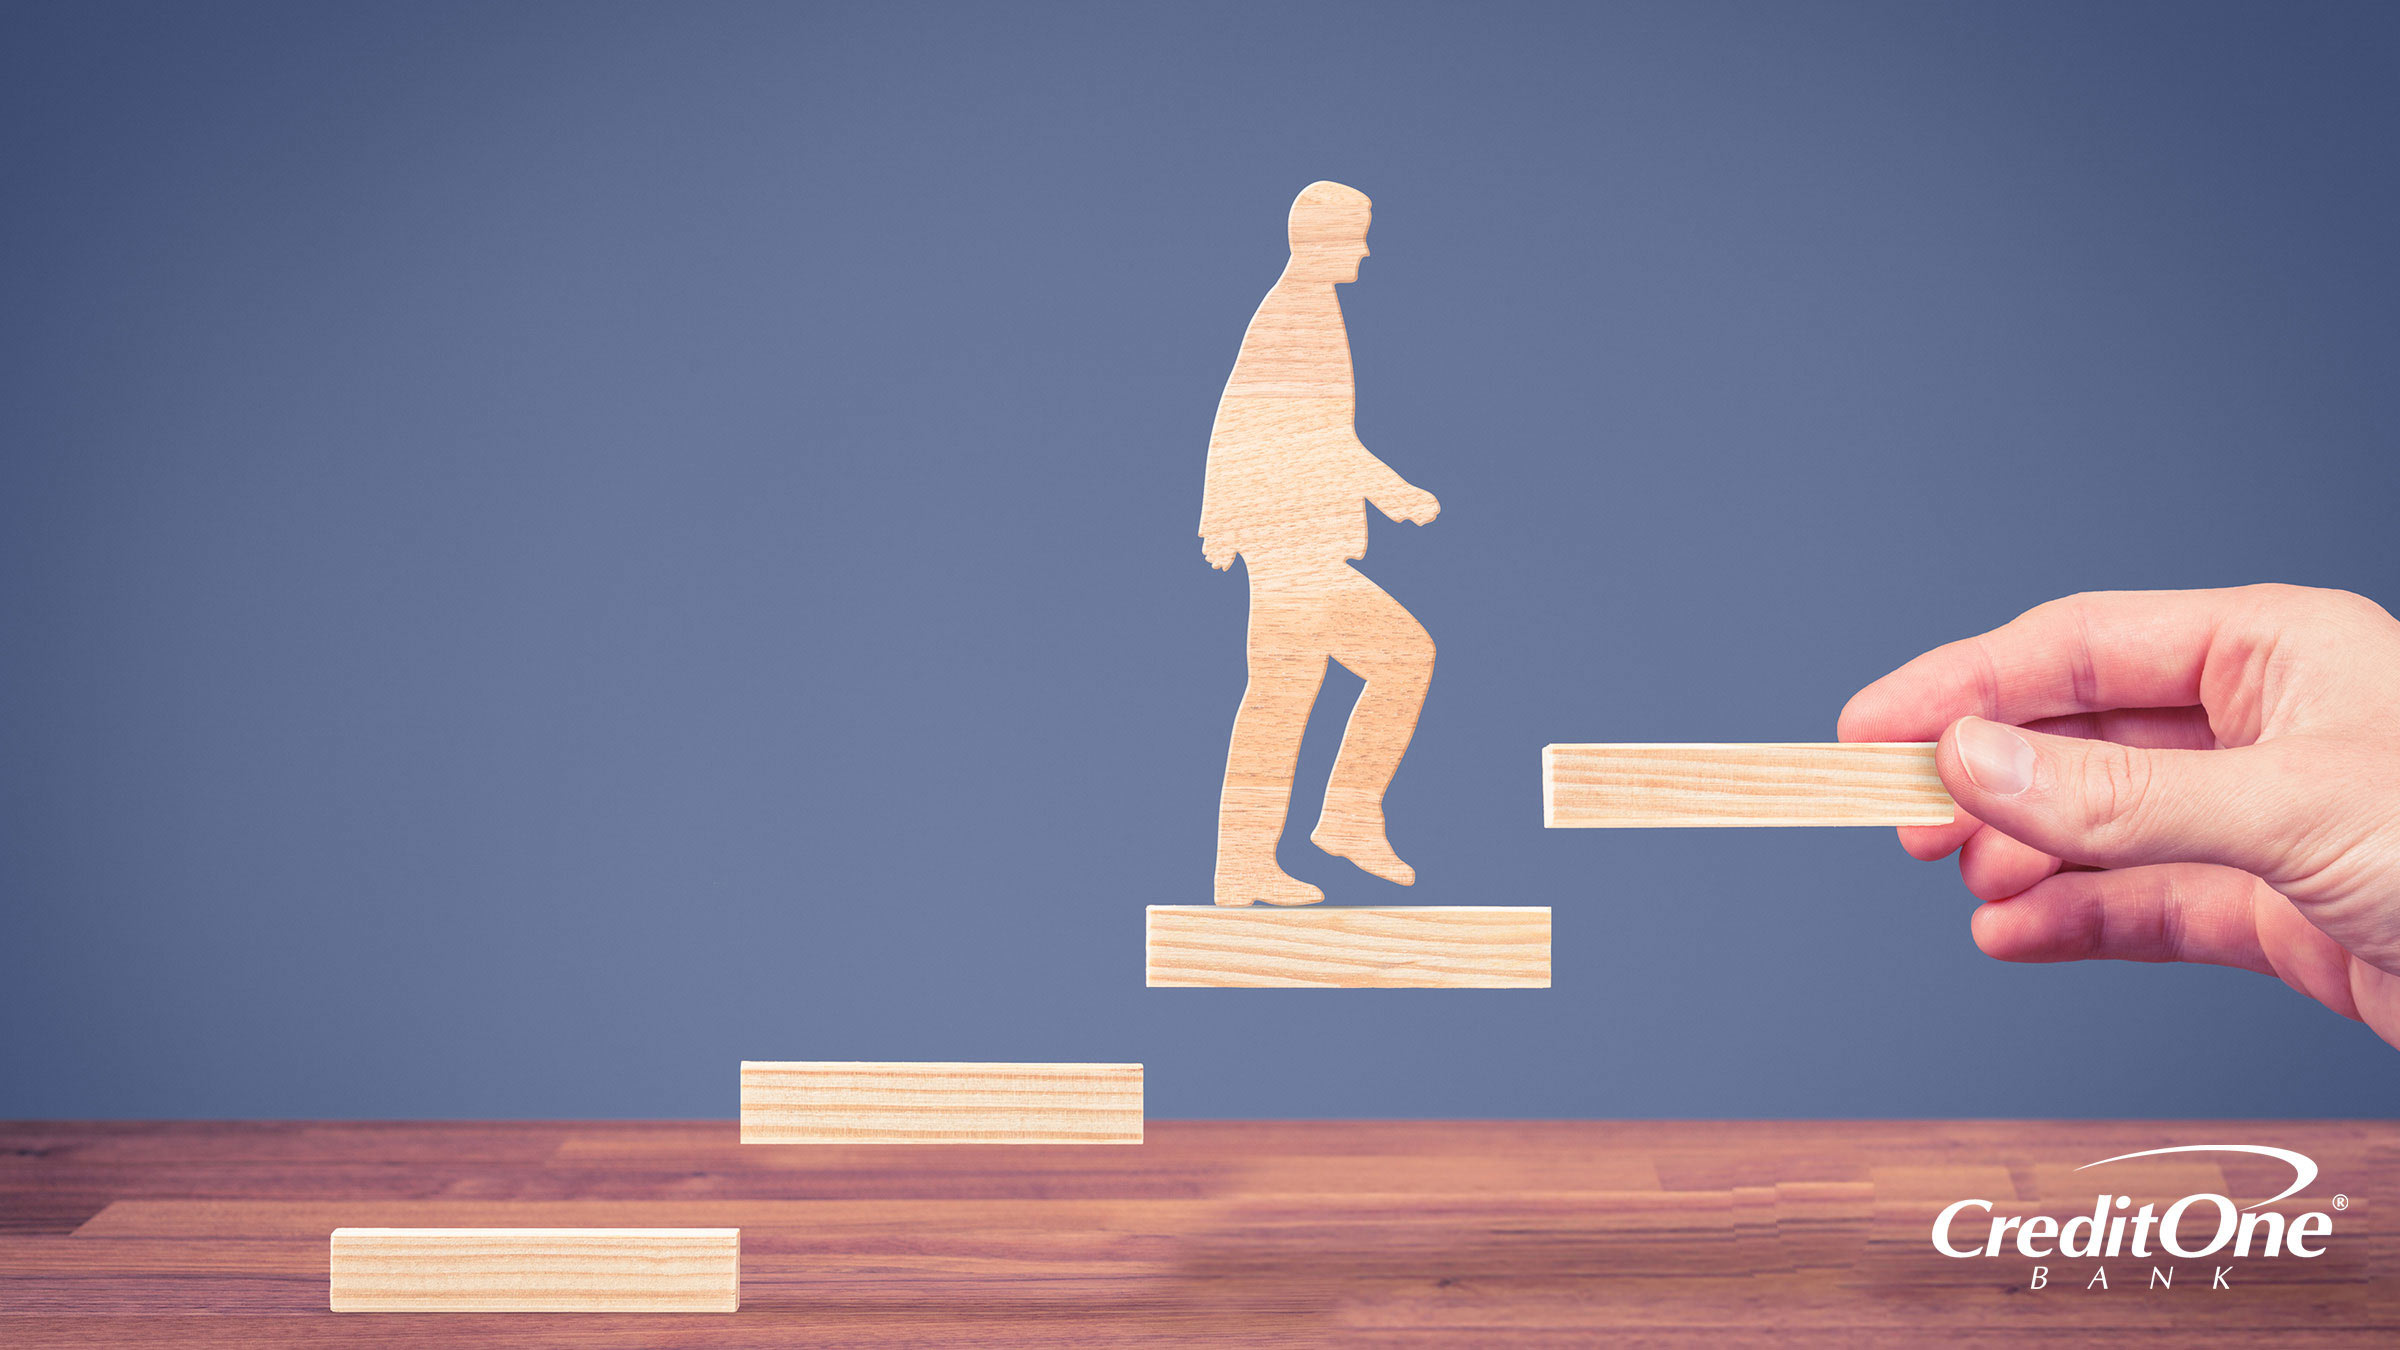 Demonstrating improved credit success by wooden block shaped like a man walking up a set of stairs